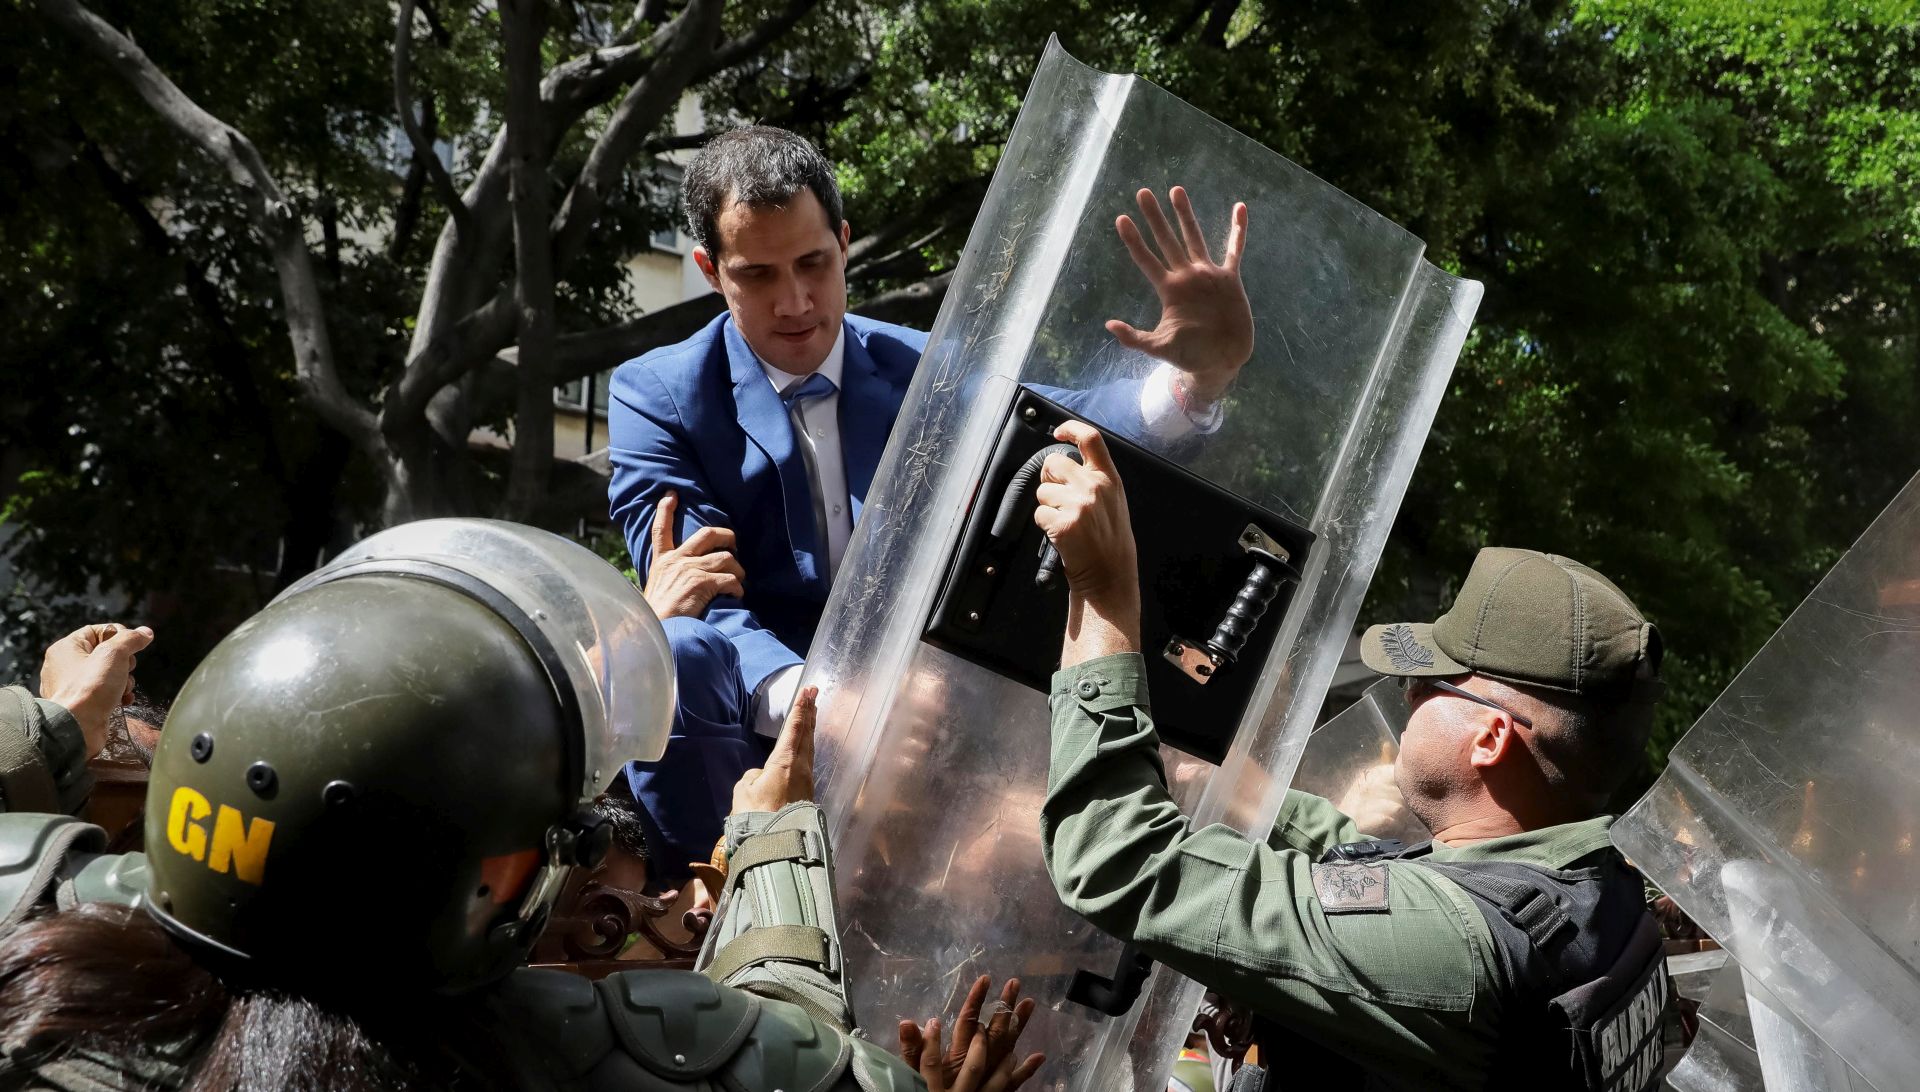 epa08105248 Venezuelan opposition leader Juan Guaido climbs a fence in an attempt to enter the headquarters of the National Assembly, guarded by the police to prevent his entry and that of opposition deputies in Caracas, Venezuela, 05 January 2020. Chavista deputies of the National Assembly (AN, Parliament) elected Luis Parra, former member of the First Justice party, as President of the Parliament, in a brief debate that opposition leader and now former president of the Parliament Juan Guaido did not attend as he was held for hours by the Police around the Legislative Palace. Before the session, troops of the Bolivarian National Police (GNP) and the Bolivarian National Guard (GNB, militarized police), prevented Guaido and other deputies access to Parliament.  EPA/Rayner Pena